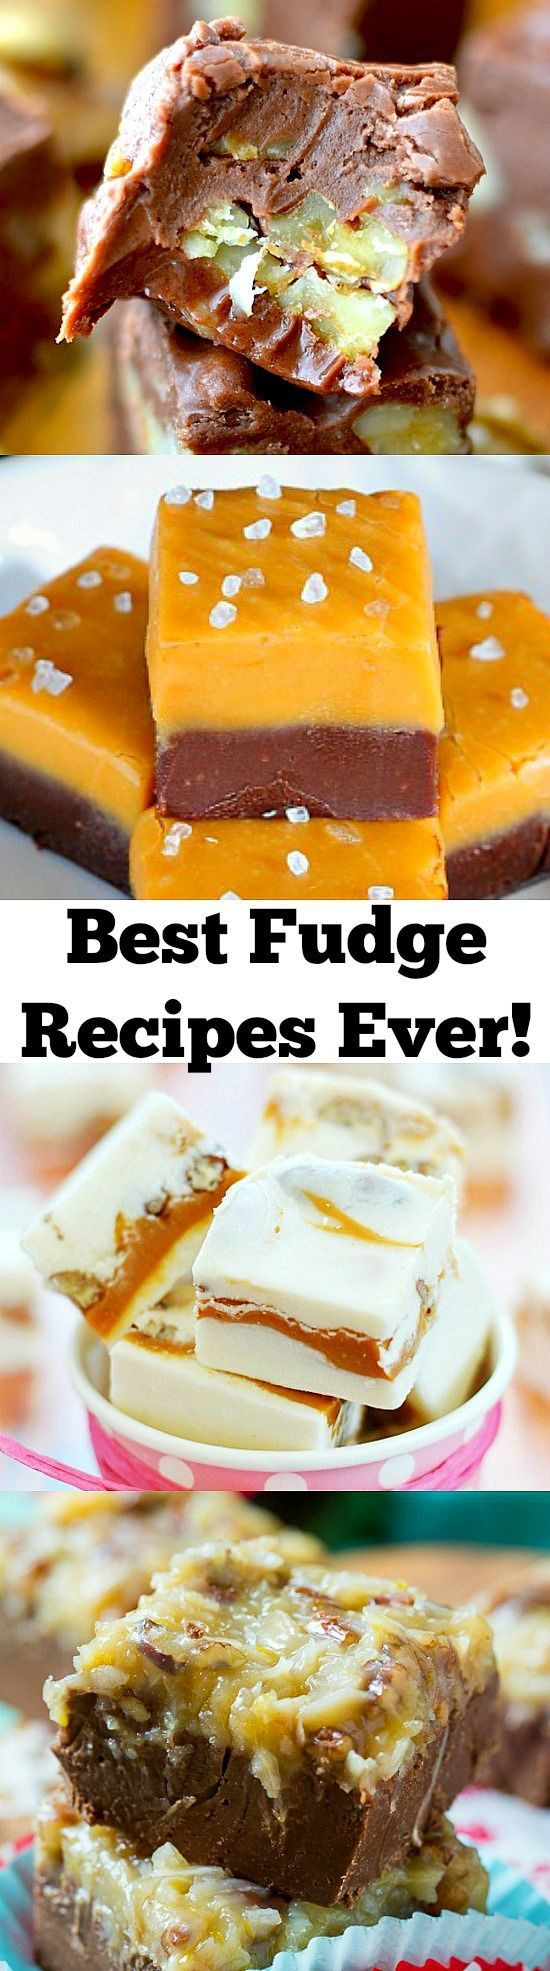 Best Fudge Recipes For Christmas
 25 Fabulous Fudge Recipes for Gift Giving and Holiday